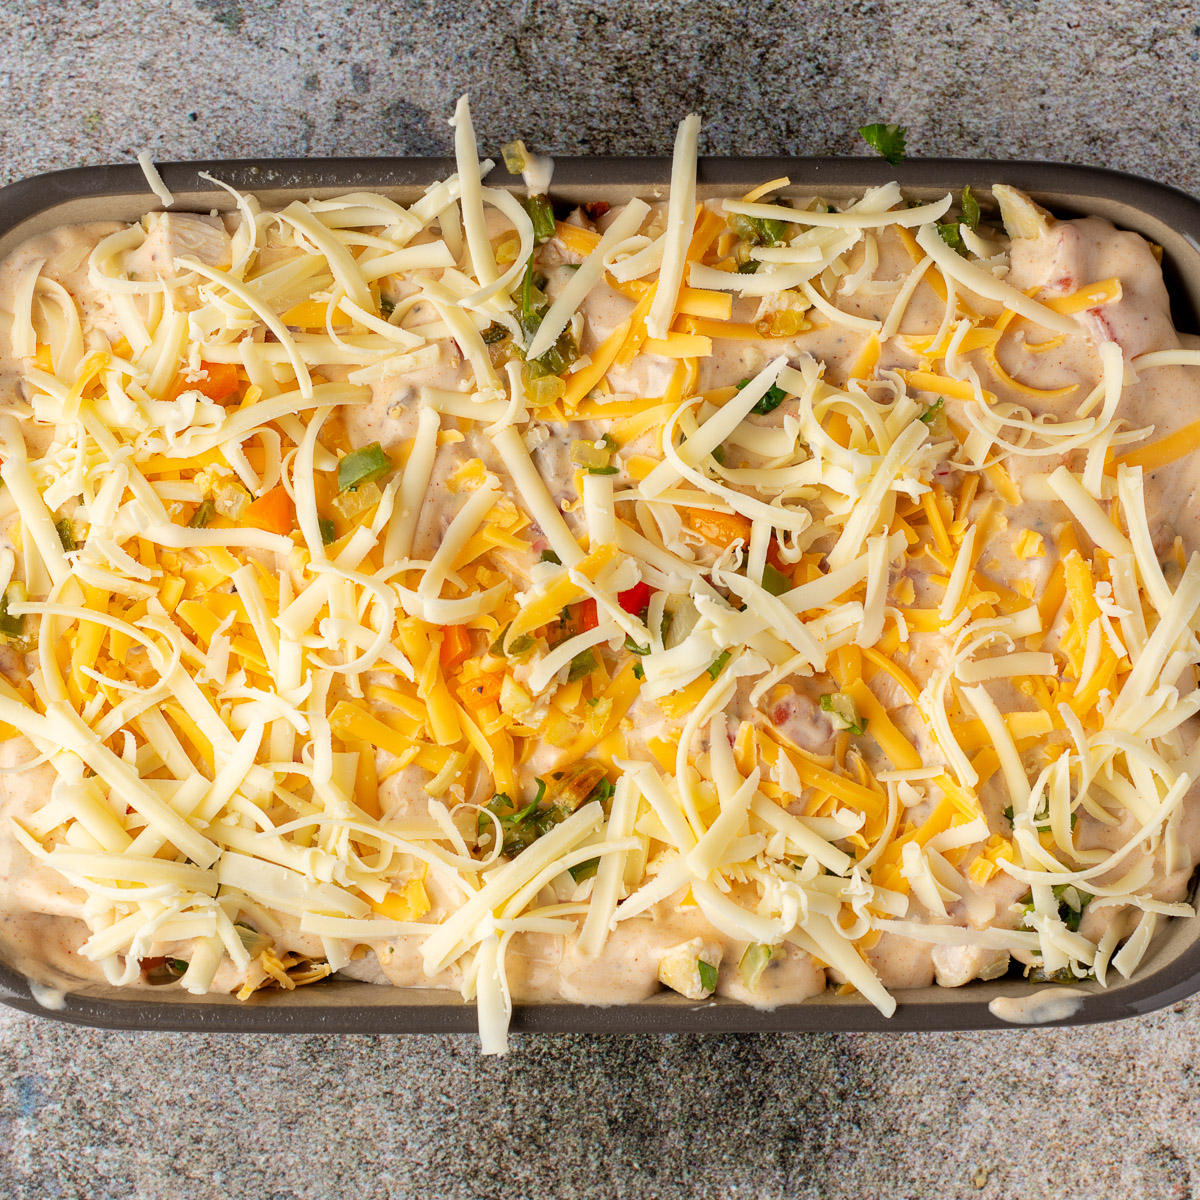 Add layers of tortillas, chicken, soup and cheese in a large casserole dish.